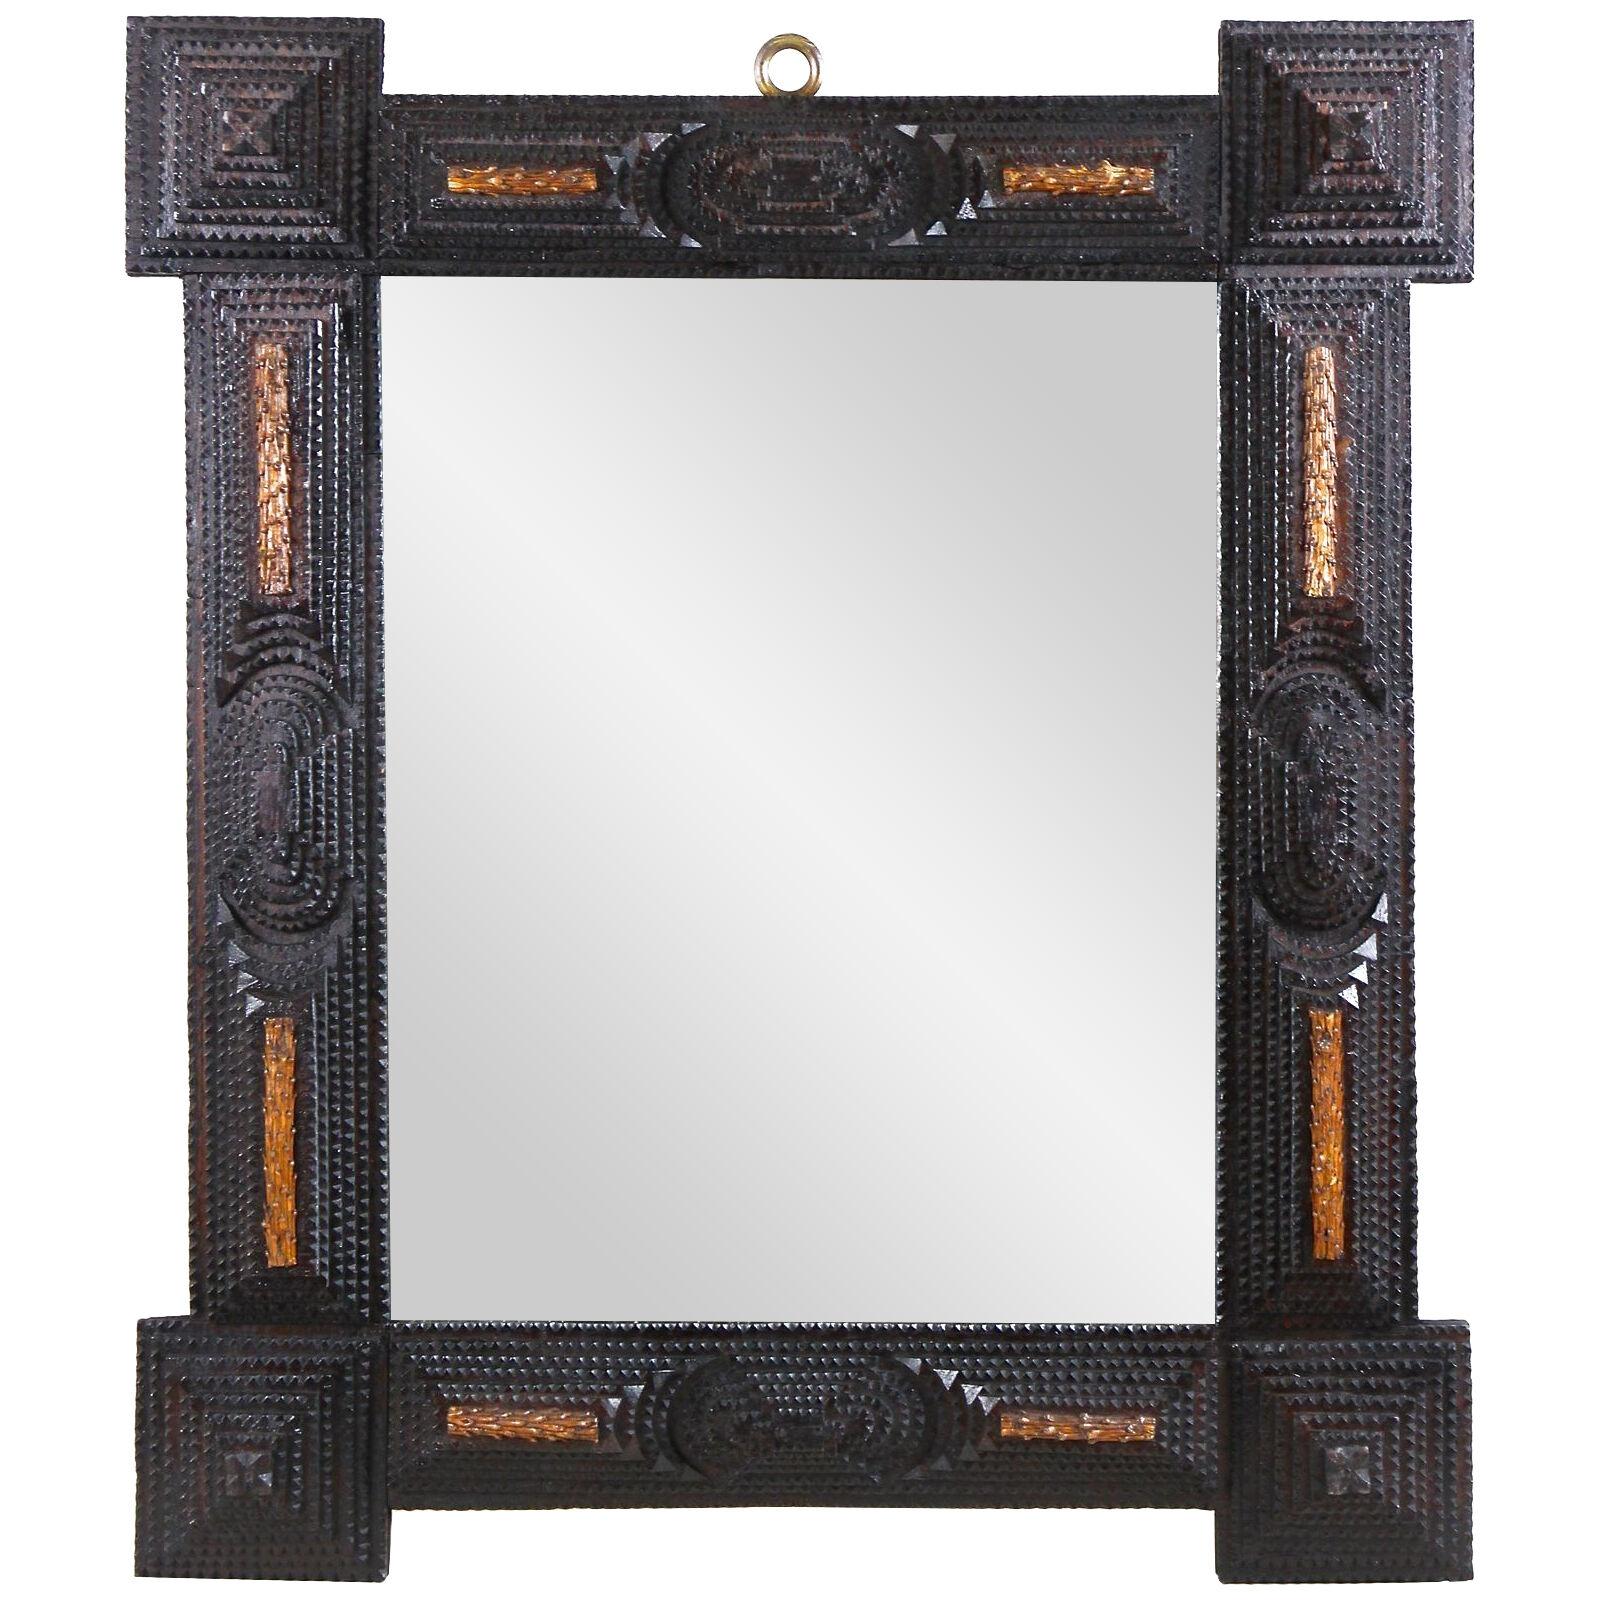 Tramp Art Rustic Wall Mirror With Spruce Branches, Austria circa 1890